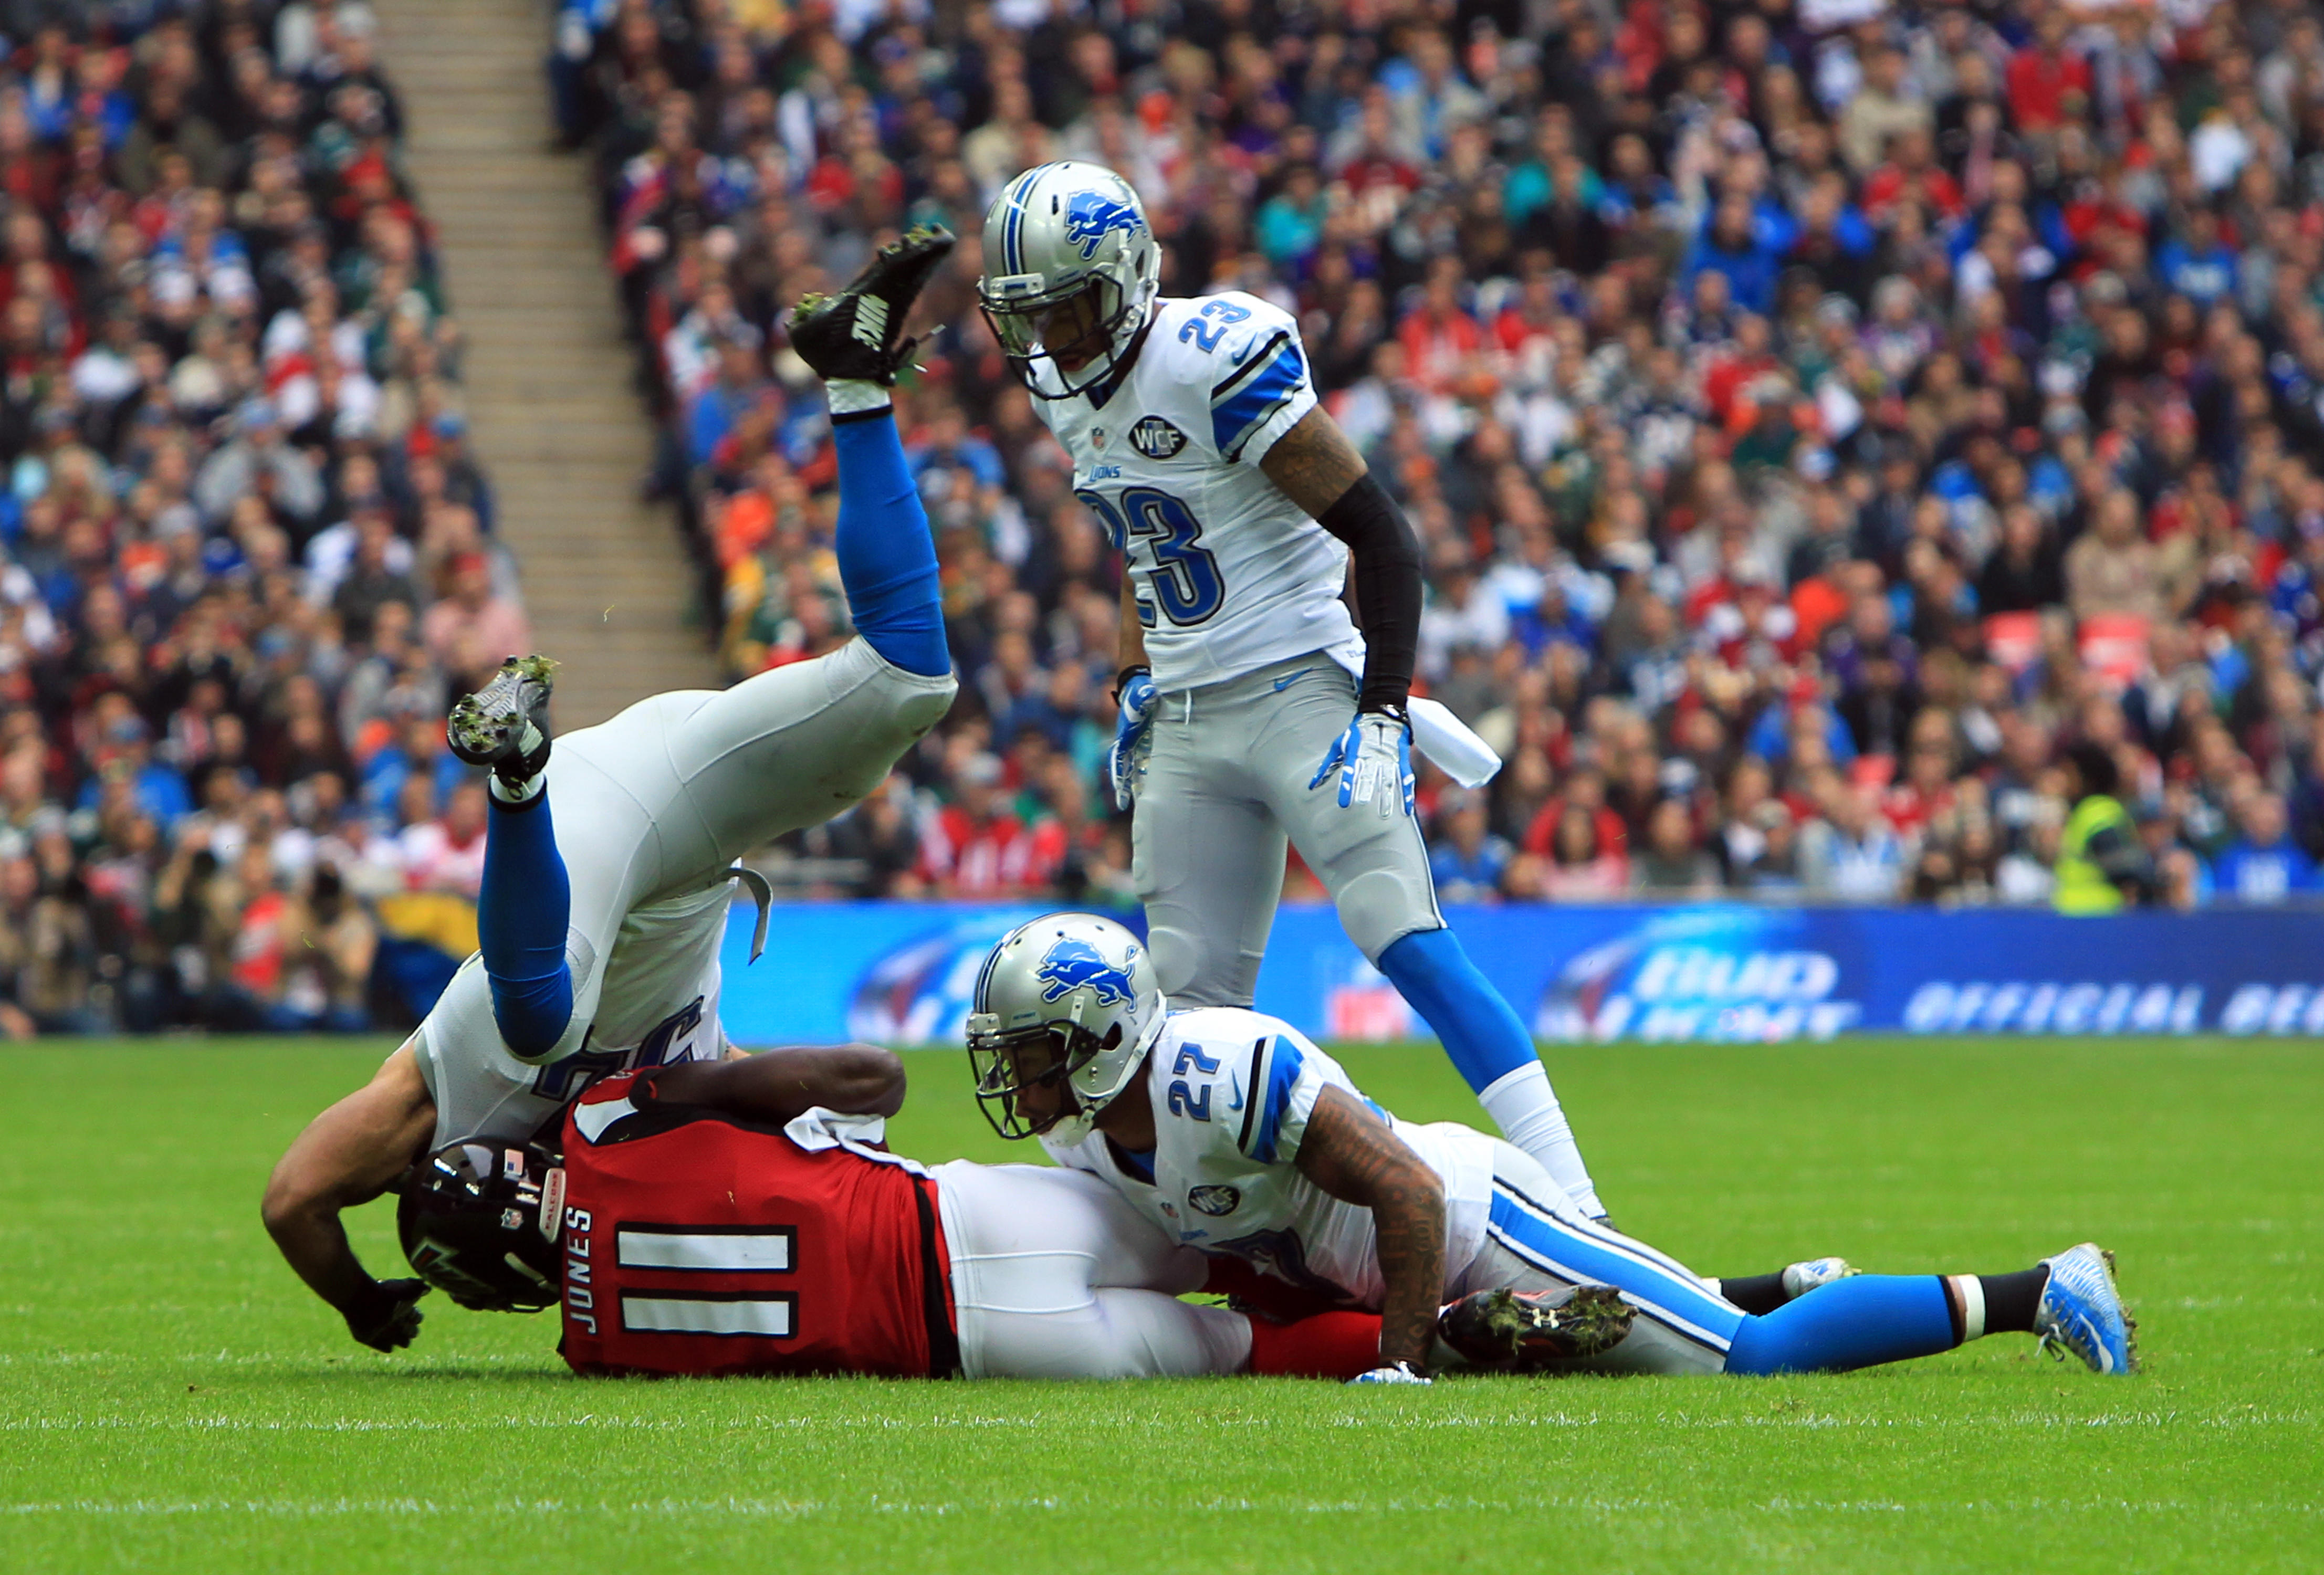 Atlanta Falcons' Julio Jones is tackled by the Detroit Lions